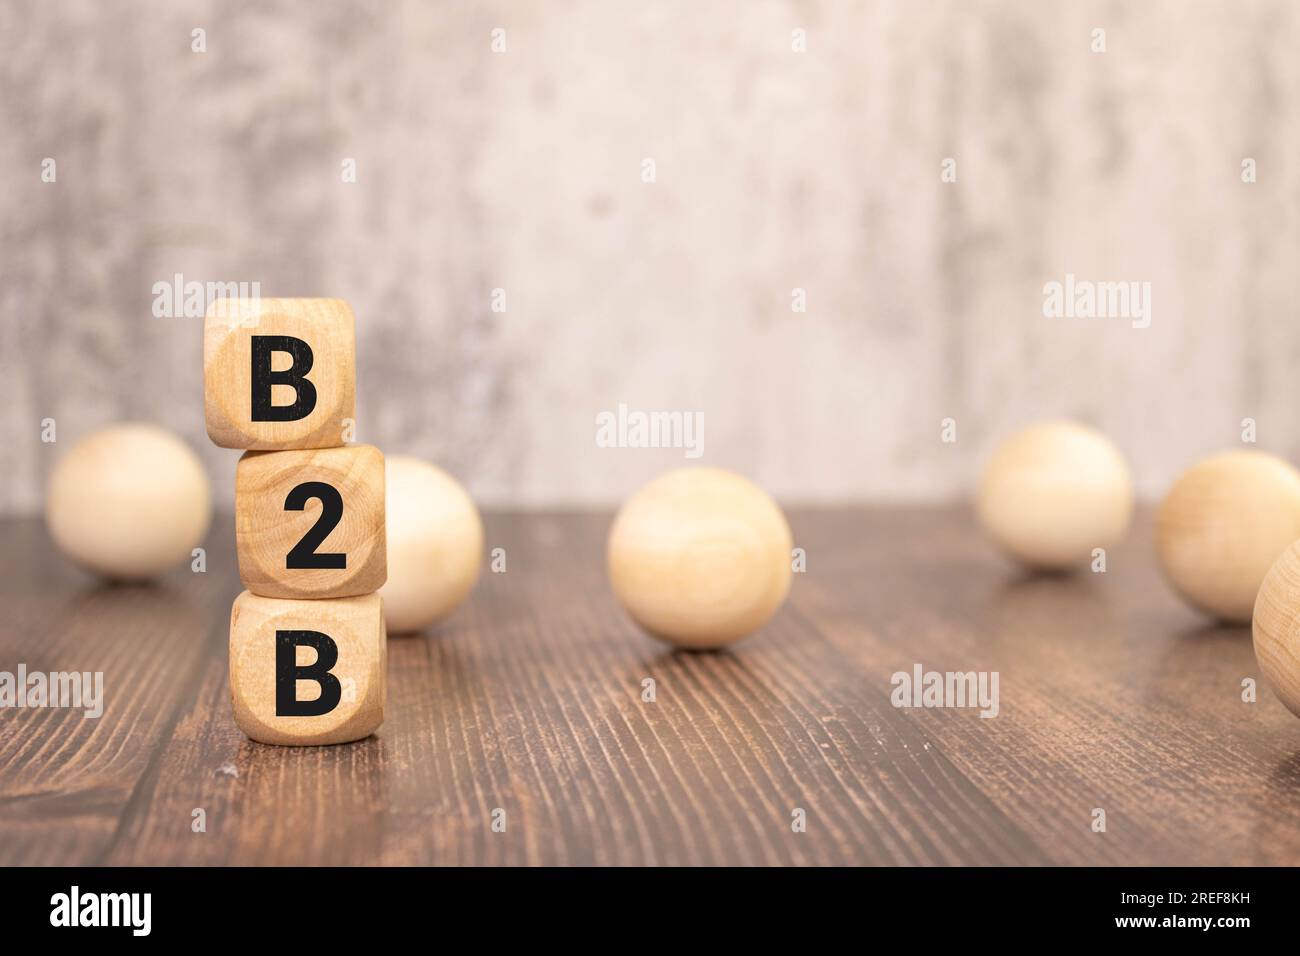 Acronym B2B- Business to Business. Wooden cubes with letters isolated on grey background. Business Concept image. Stock Photo